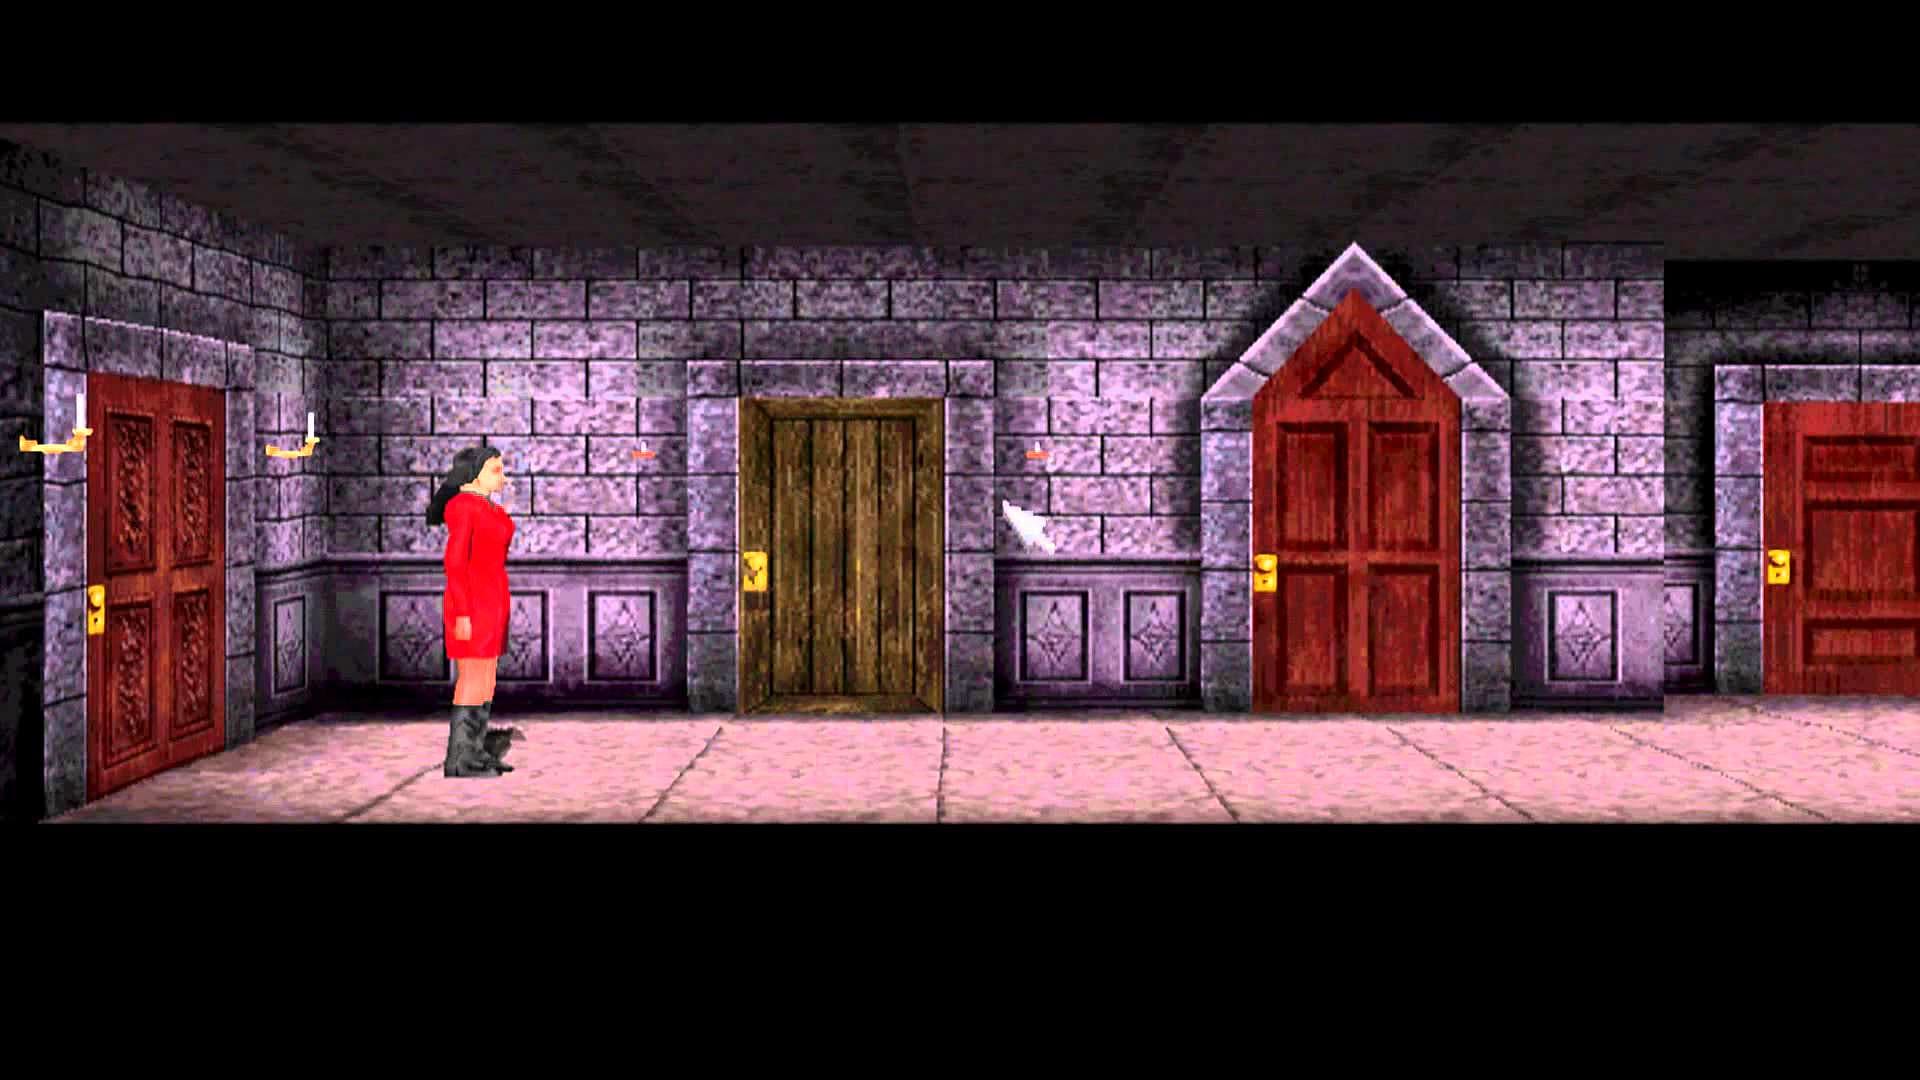 download clock tower game ps1